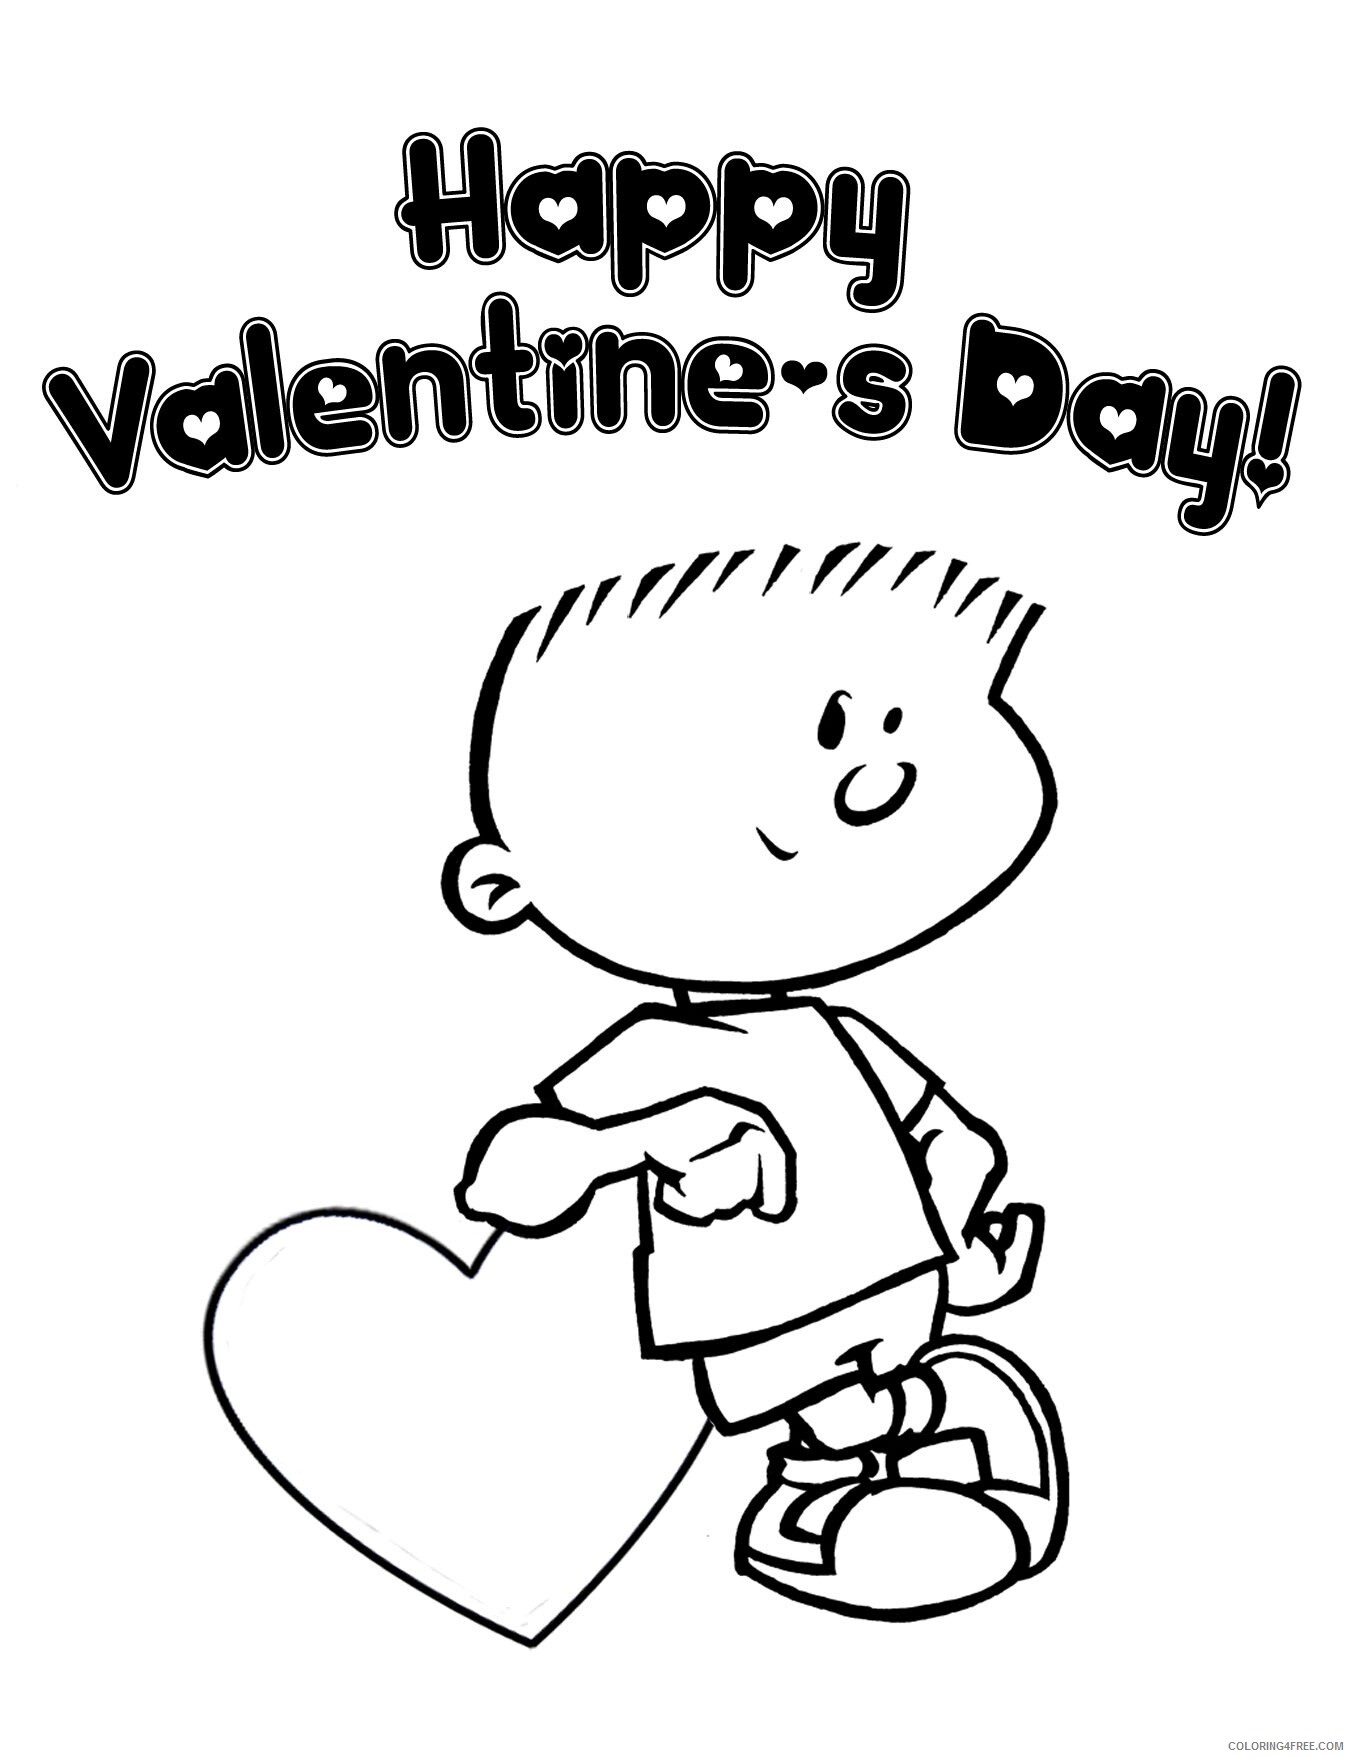 Valentines Day Coloring Pages Holiday Valentine Day Printable 2021 1001 Coloring4free